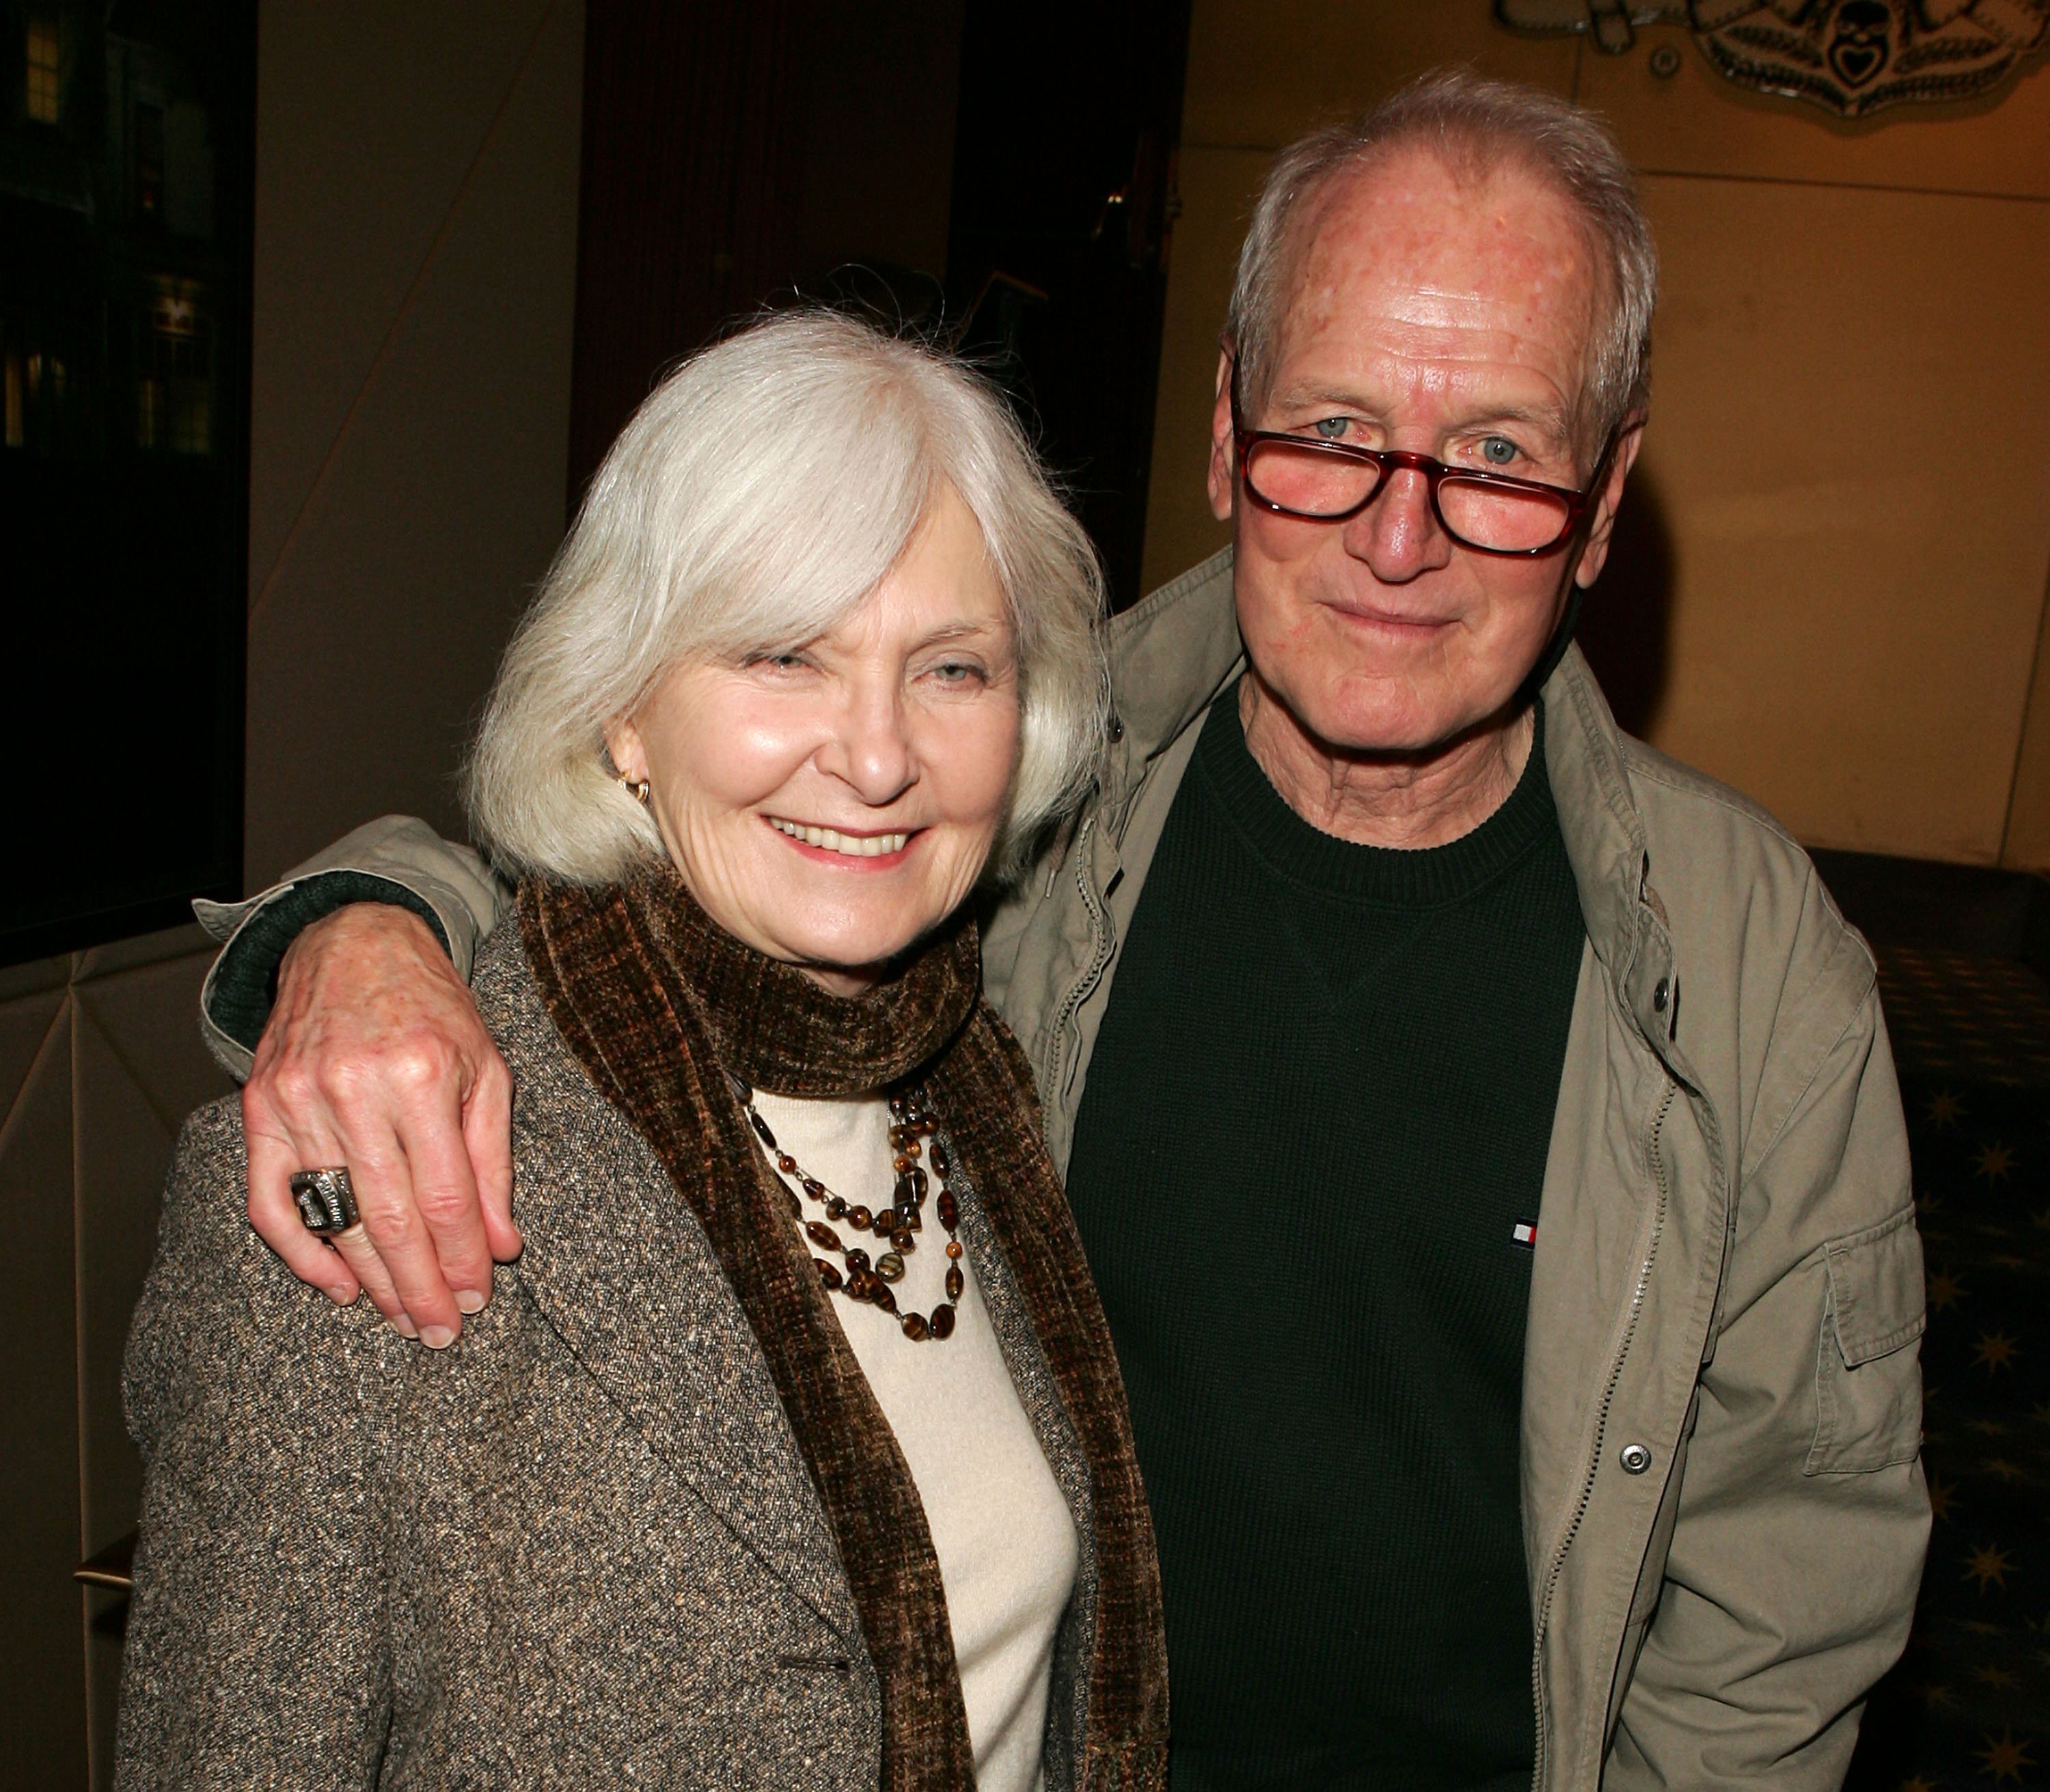 Actors Joanne Woodward and Paul Newman attend a reception for a special screening of "The Woodsman" on January 10, 2004 in New York City.| Source: Getty Images